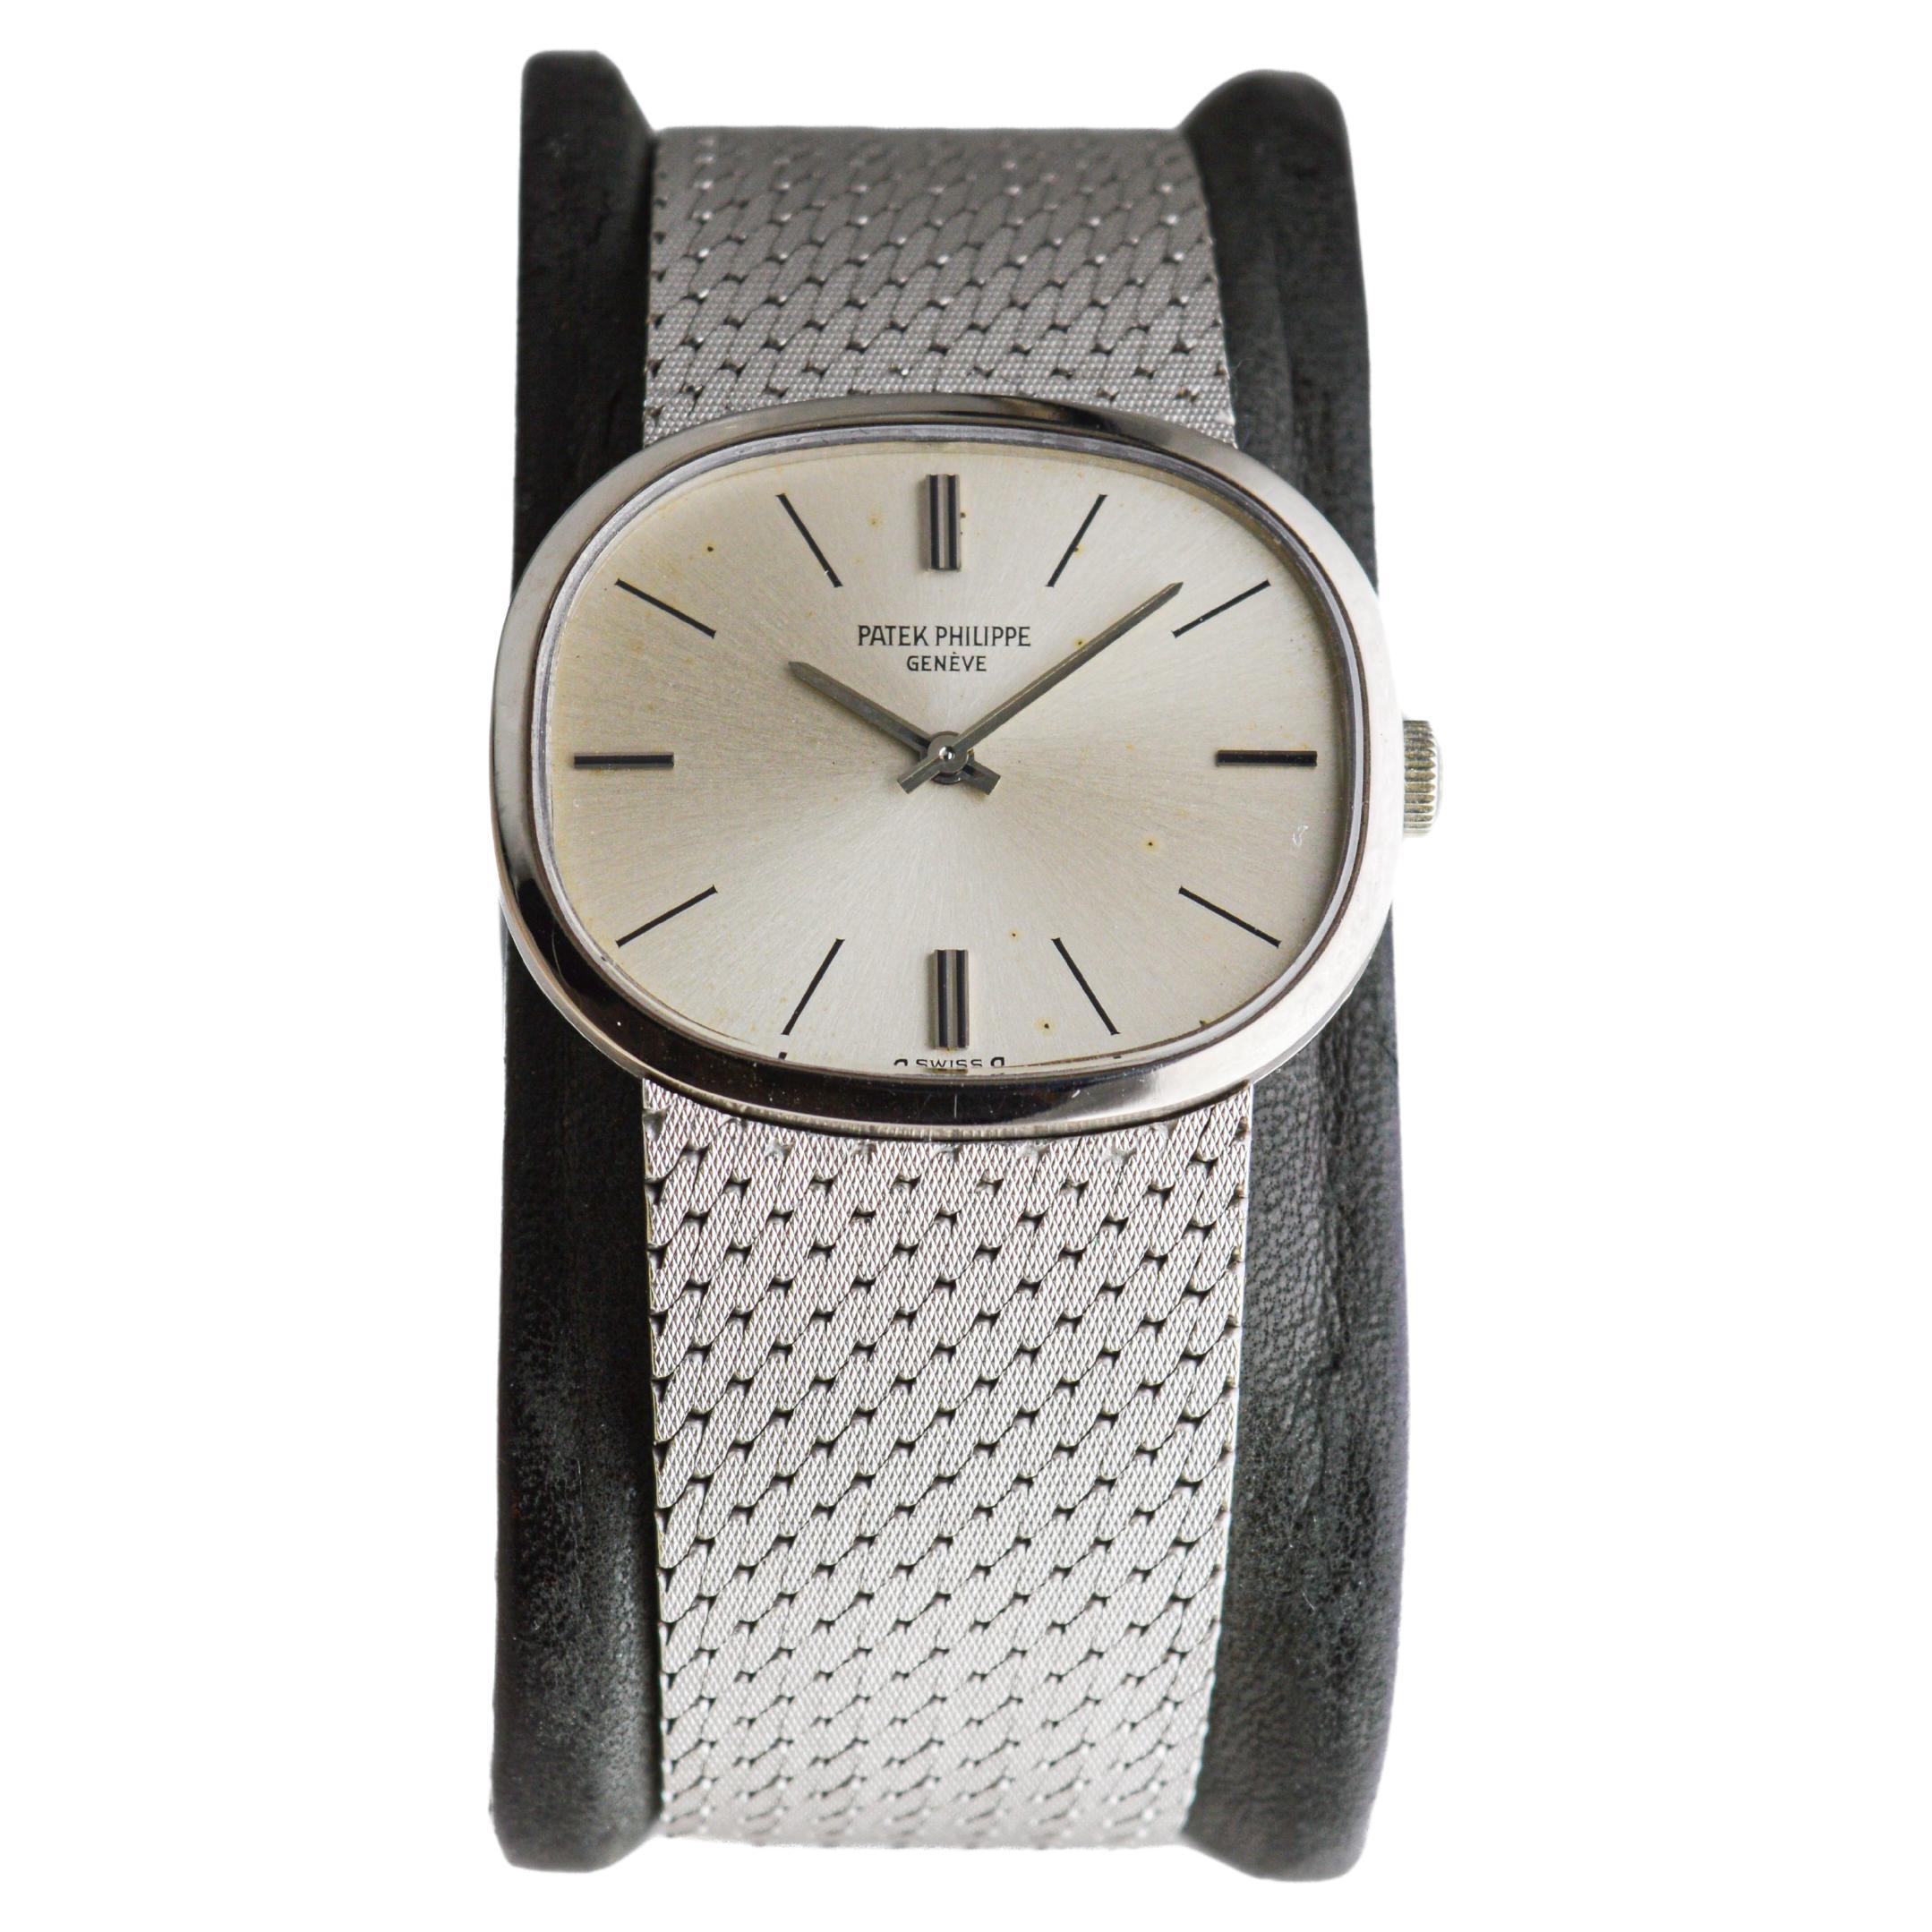 FACTORY / HOUSE: Patek Philippe & Cie.
STYLE / REFERENCE: Oval Dress Bracelet Watch / Reference 3545-1
METAL / MATERIAL: 18kt White Solid Gold
CIRCA / DATE: 1971 
DIMENSIONS: Length 32mm X Diameter 27mm
MOVEMENT / CALIBER: Manual Winding / 18 Jewels